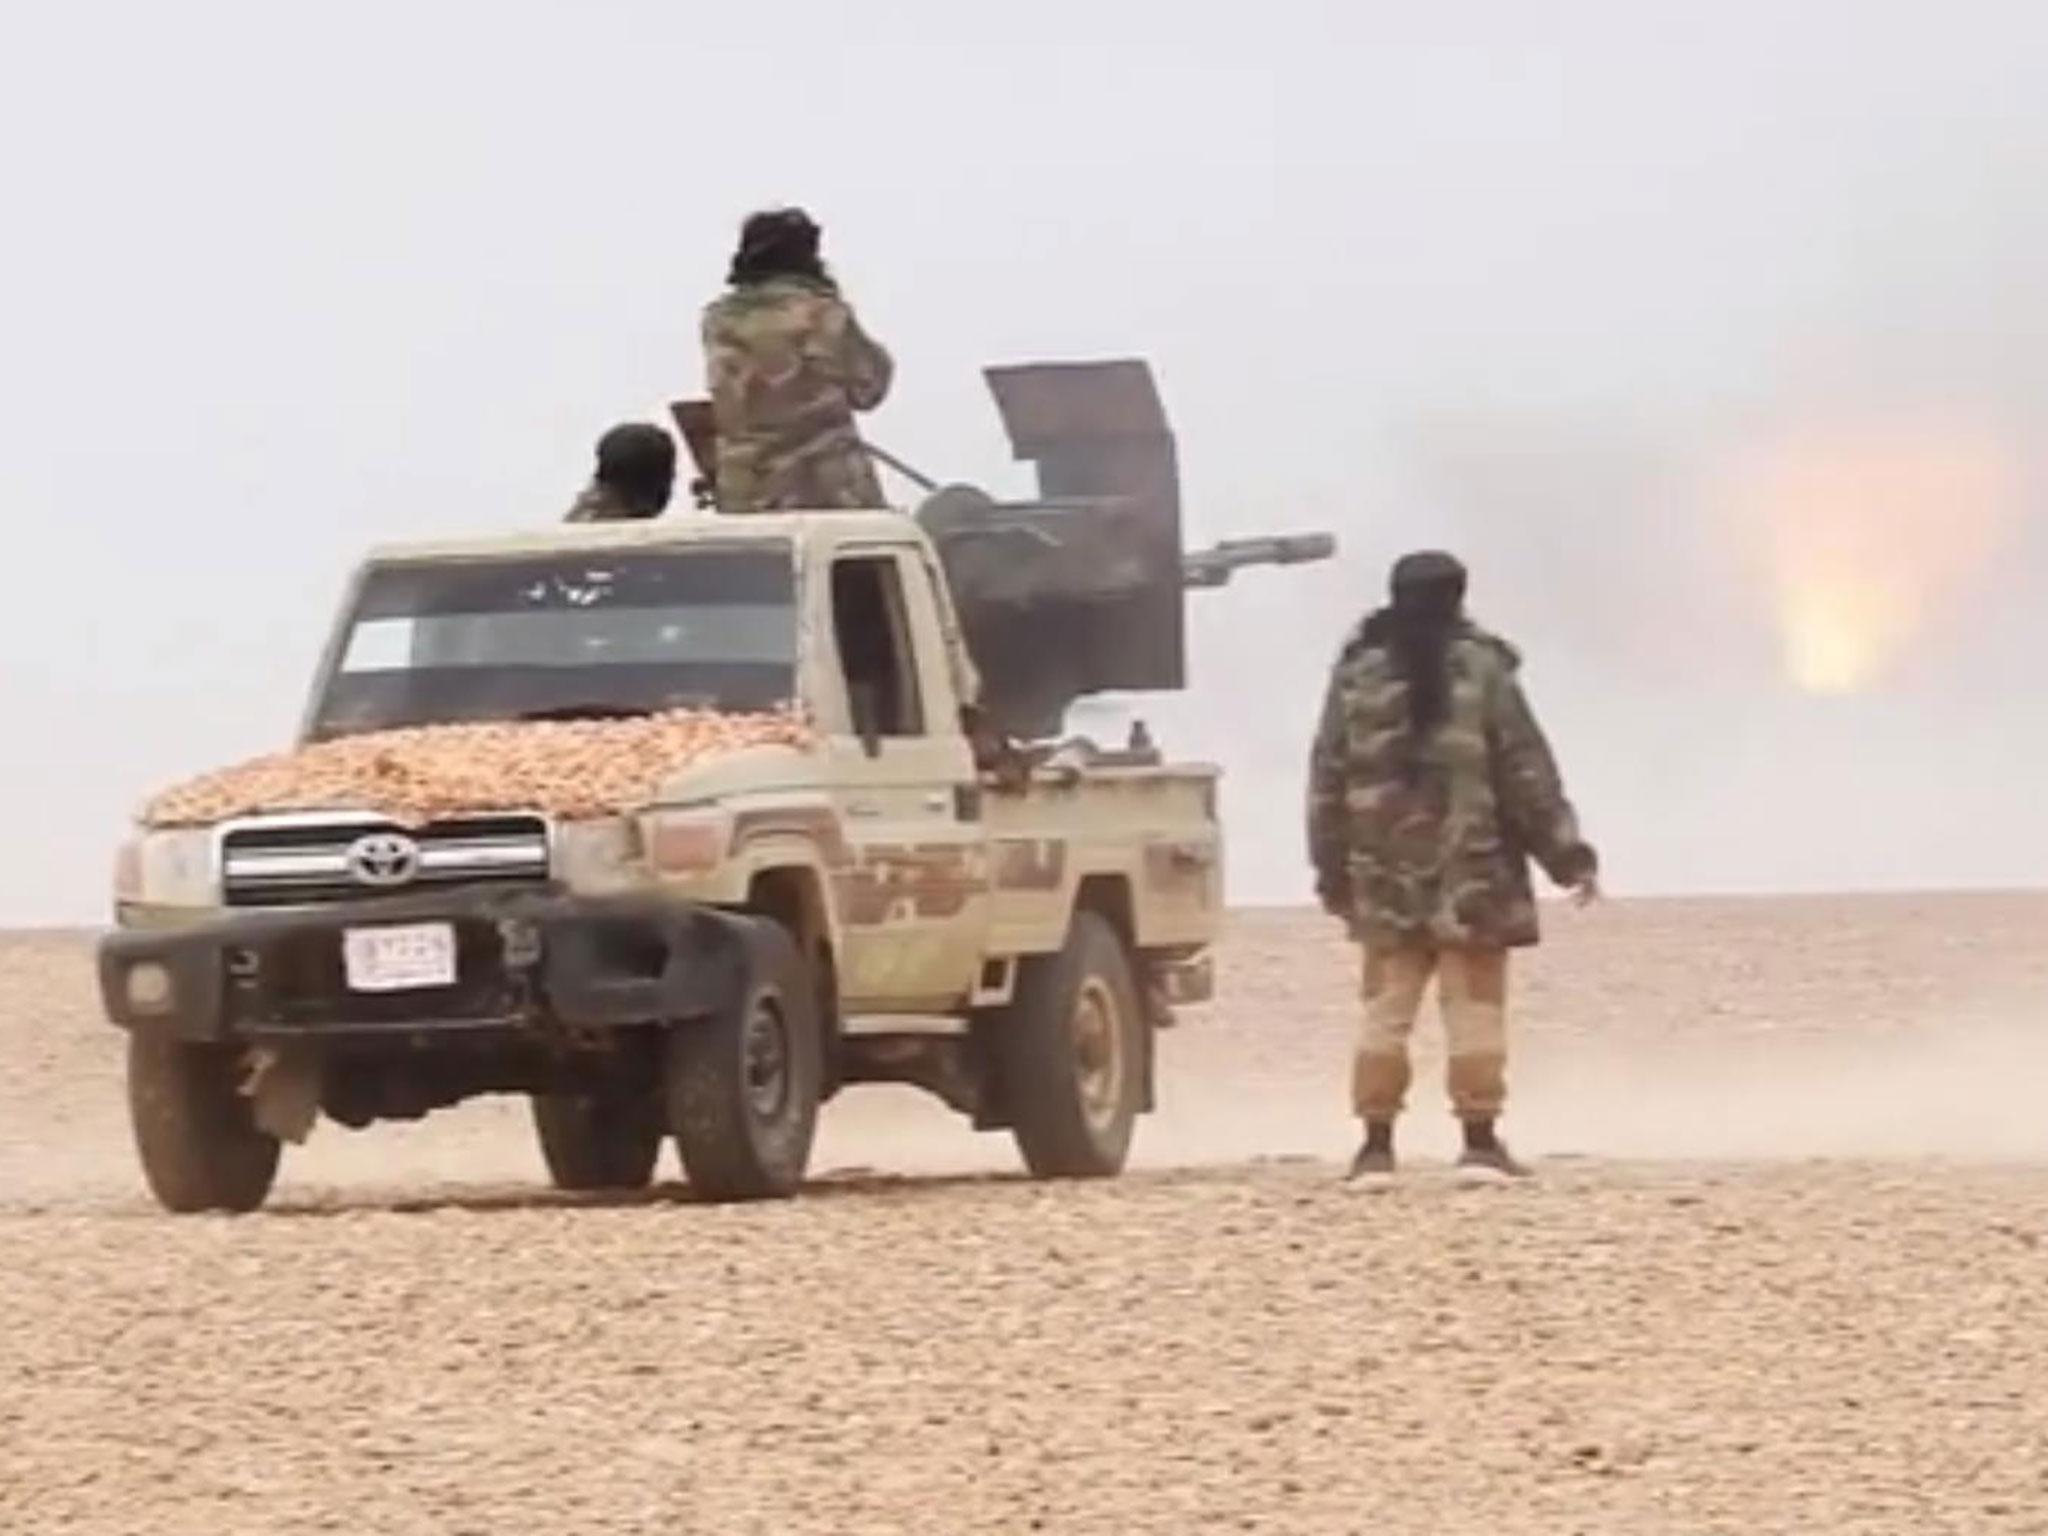 Isis fighters attacking the Syrian army on the outskirts of Palmyra on 9 December